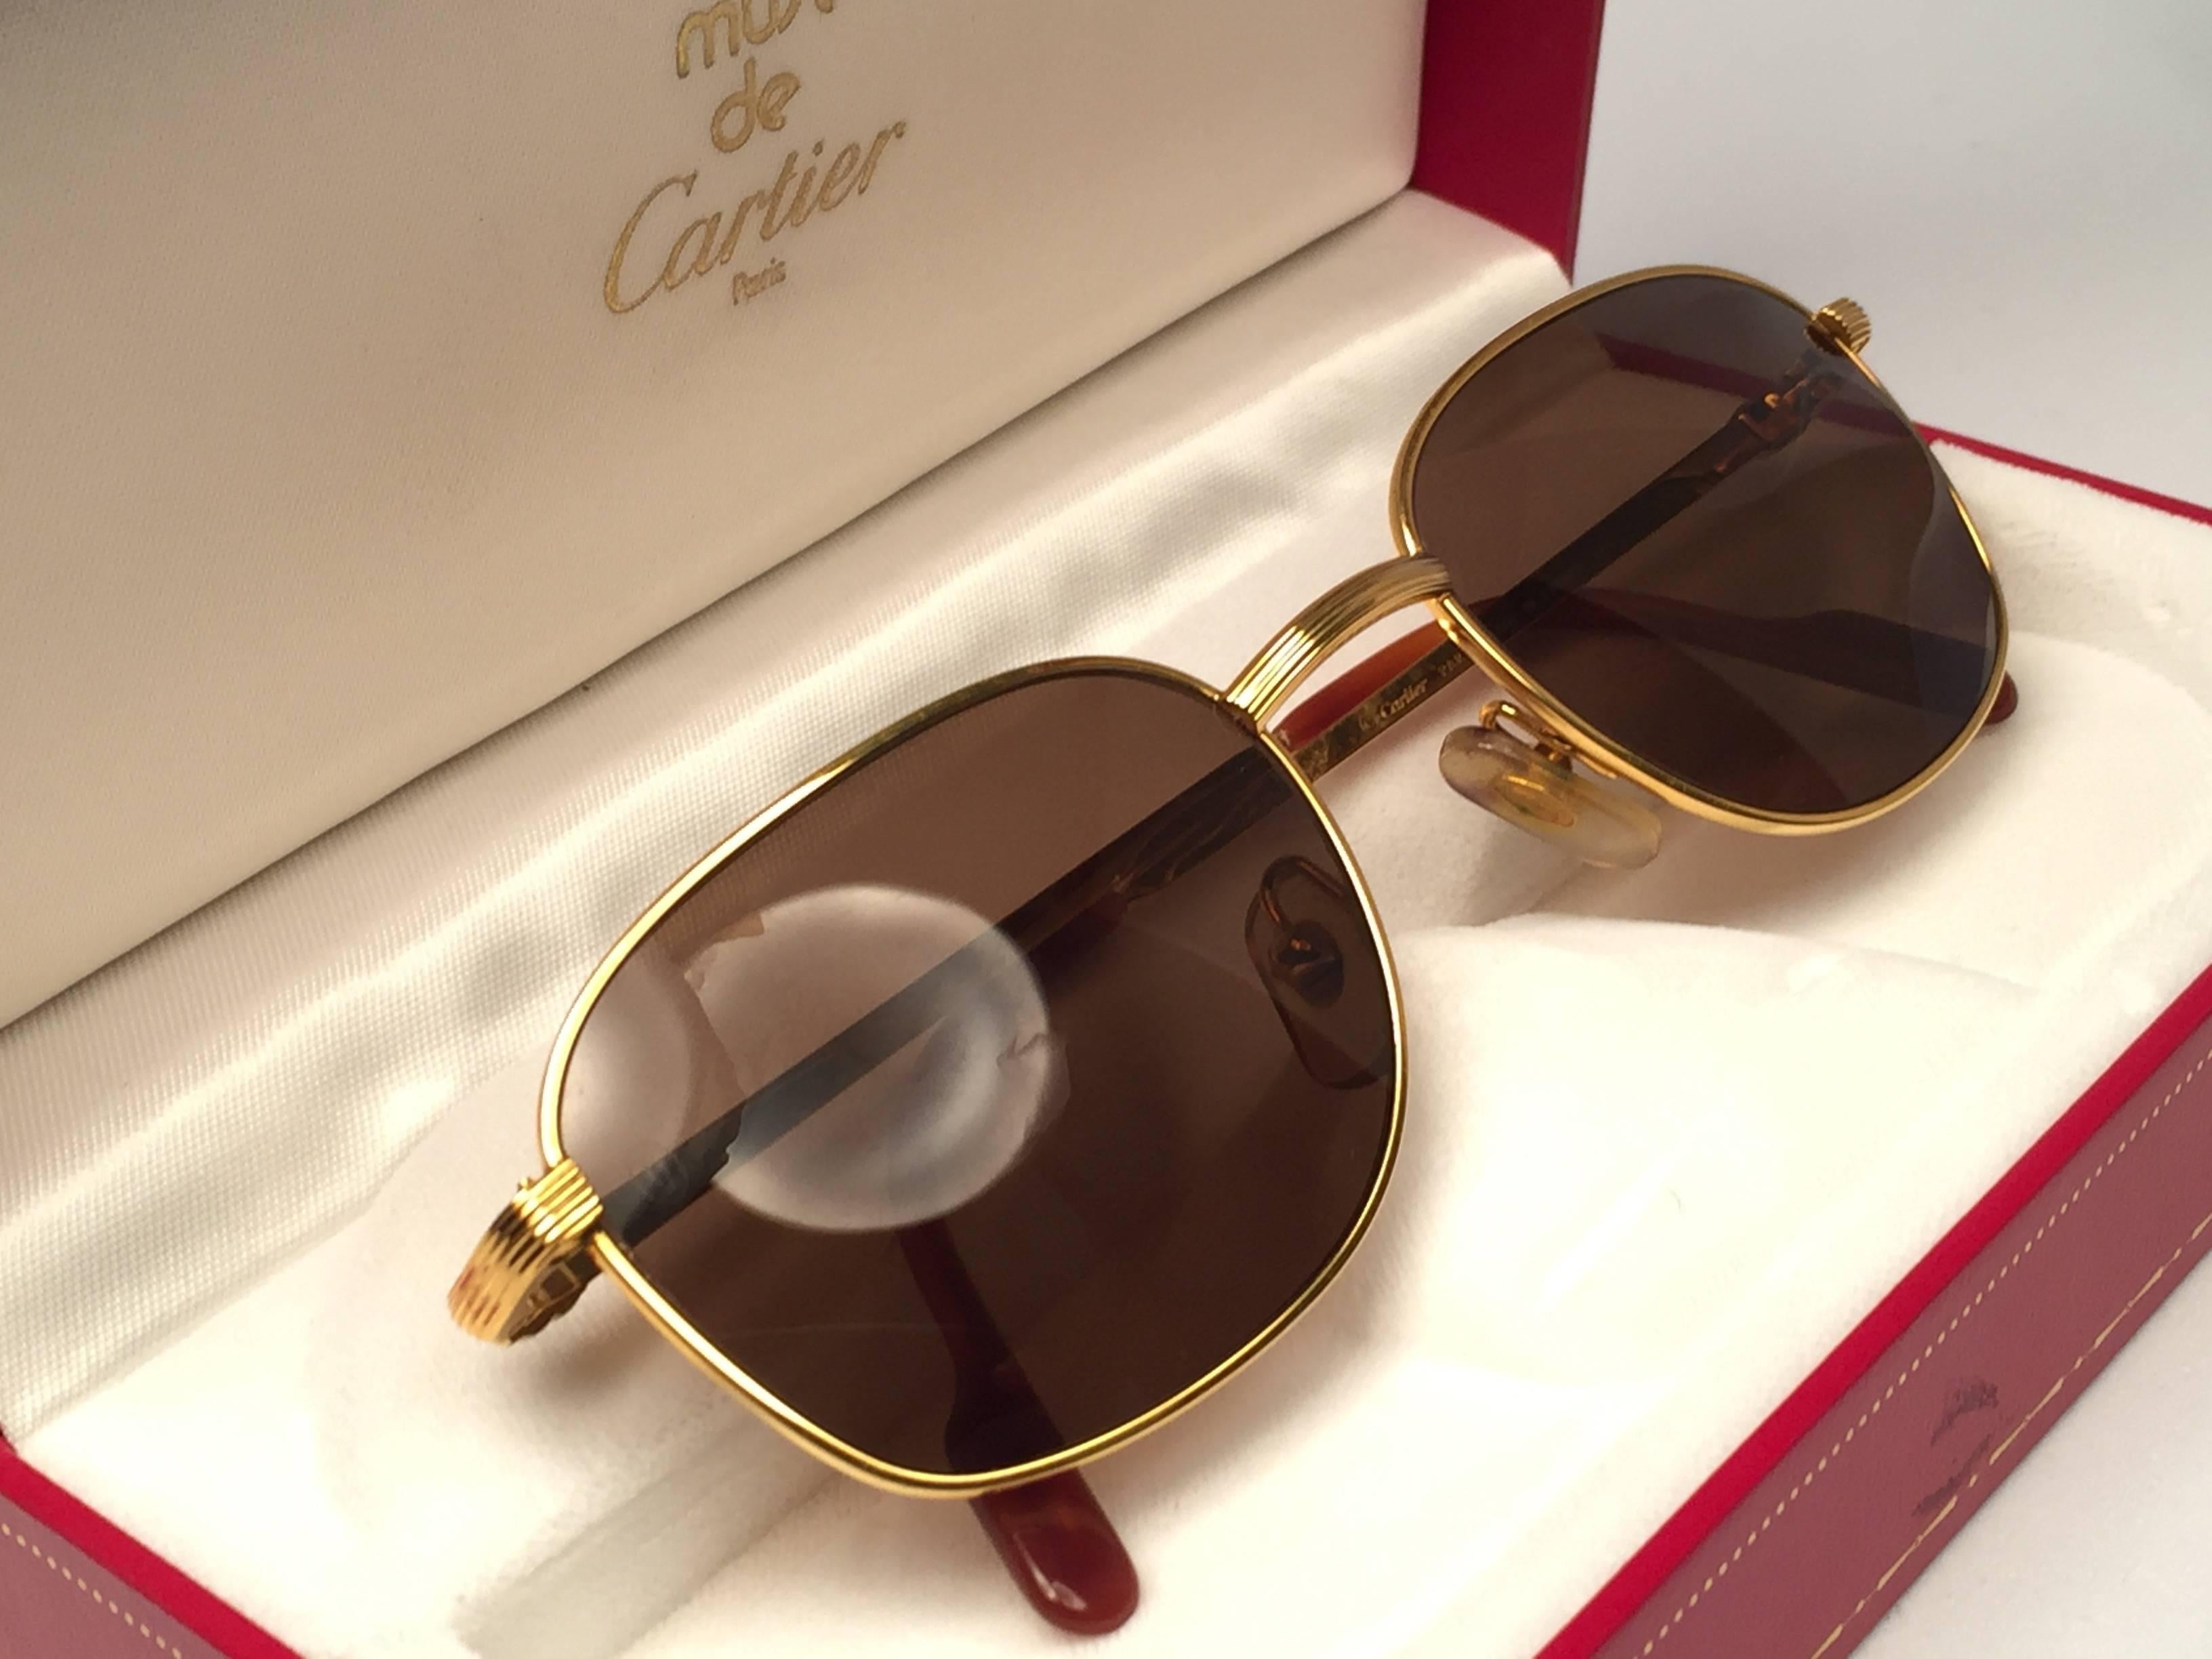 New 1990 Cartier Segur 56MM Sunglasses with original Cartier brown (uv protection) lenses.  All hallmarks. Cartier gold signs on the ear paddles. These are like a pair of jewels on your nose. This piece may have minor sign of wear due to